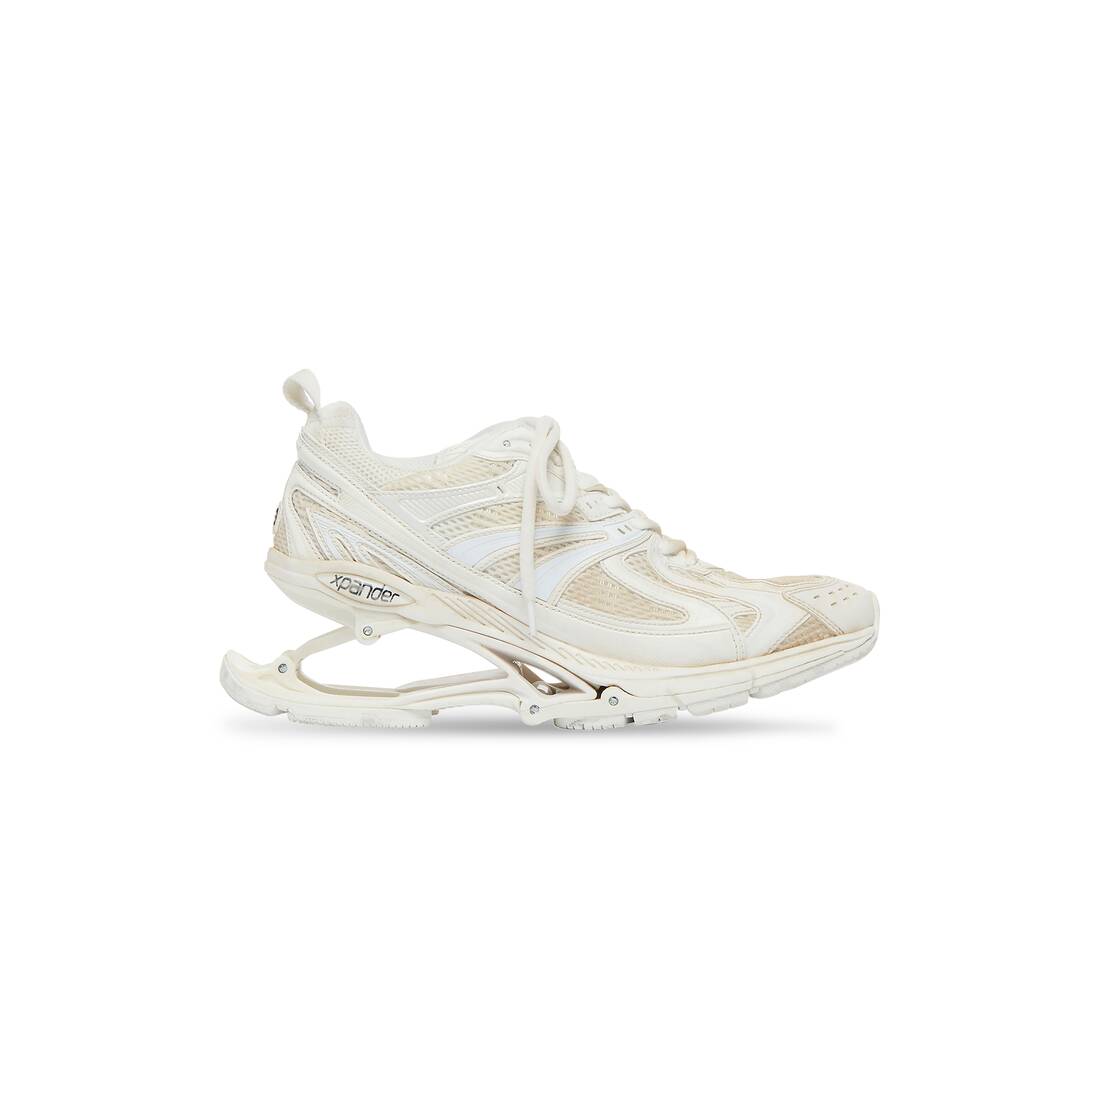 Balenciaga XPander Official Images  Where to Buy Here